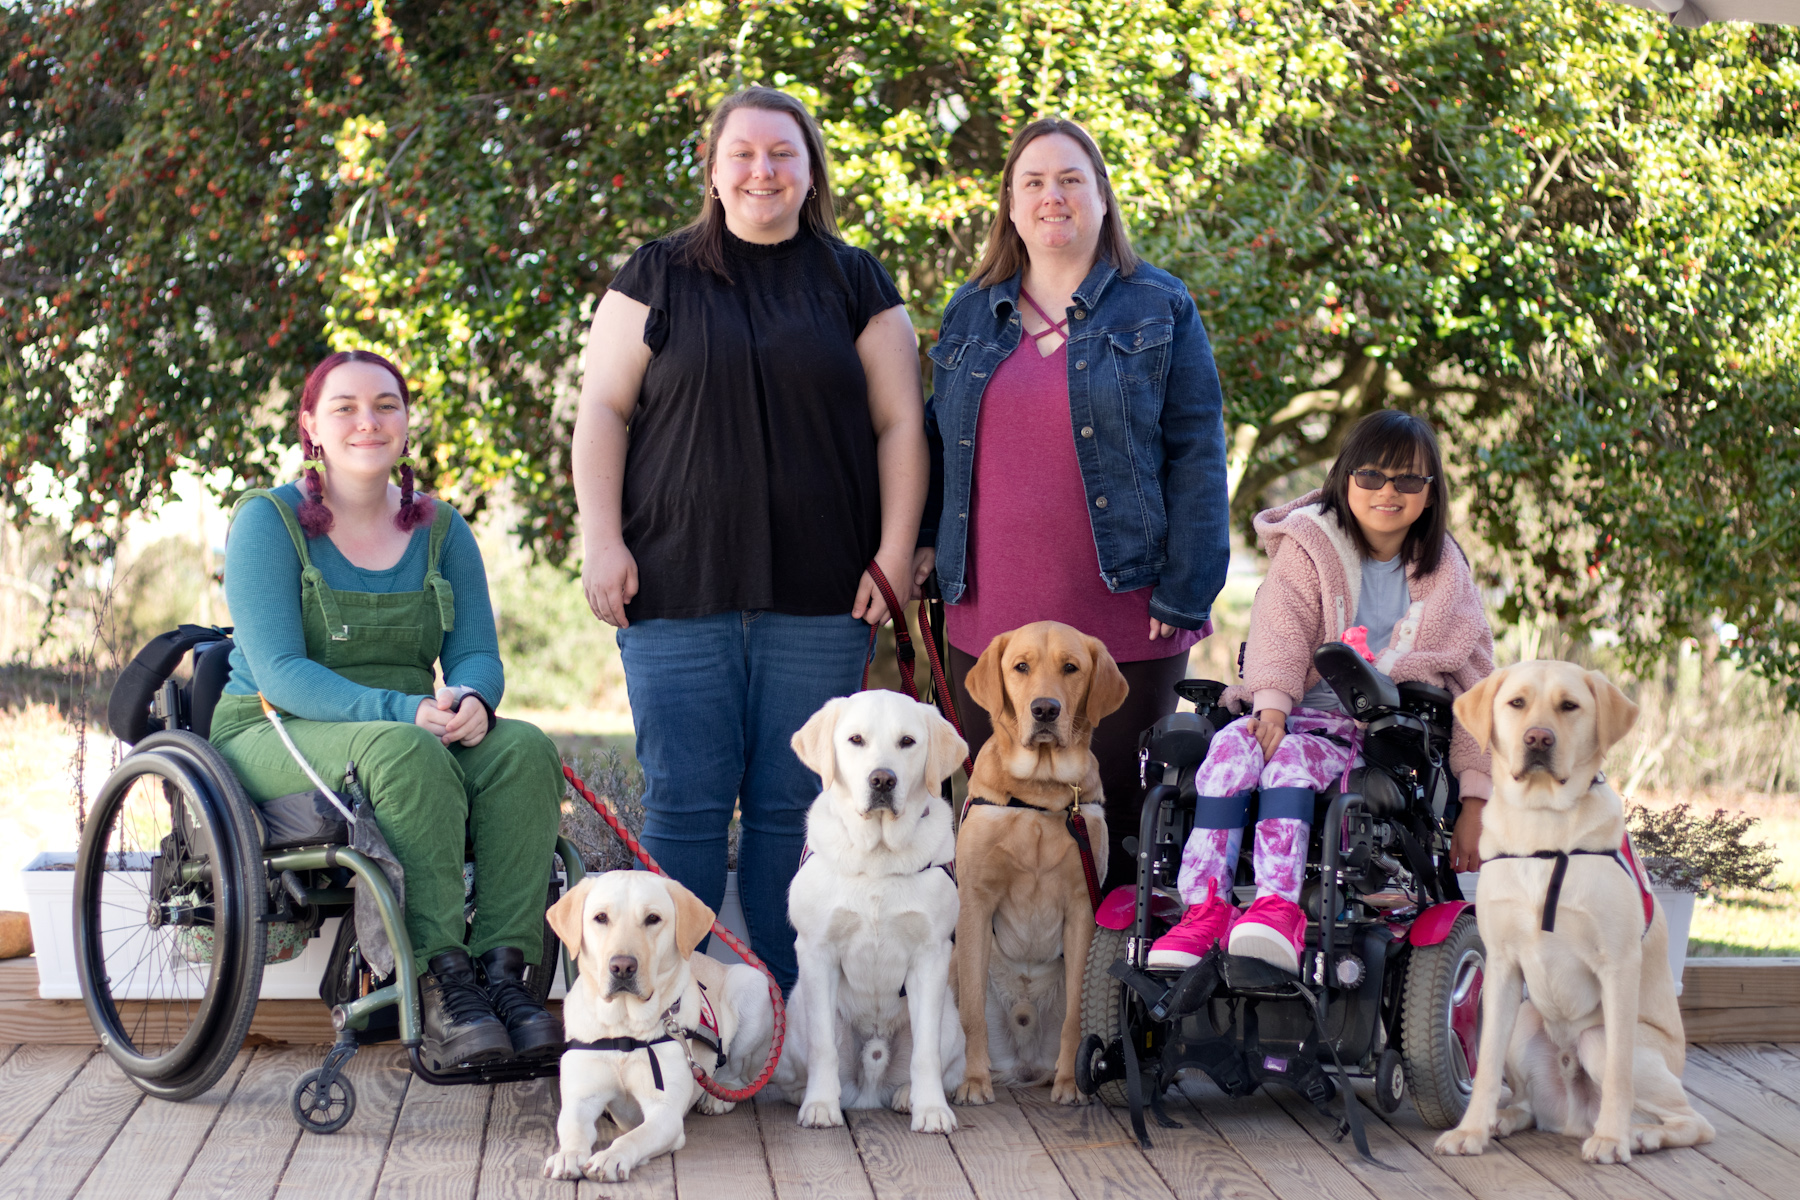 Three women and a girl posed in a row on a deck with four yellow labrador retrievers sitting in front of them. The woman on the left has reddish purple braided pigtails and is wearing green overalls over a blue shirt. She is sitting in a manual wheelchair. In the middle are two women with long brunette hair standing, the one on the left in a black blouse and the one on the right in a pink blouse with a jean jacket. The girl on the right has black hair and sunglasses and is wearing a pink jacket, patterned pink pants, and bright pink shoes which match her pink power wheelchair.